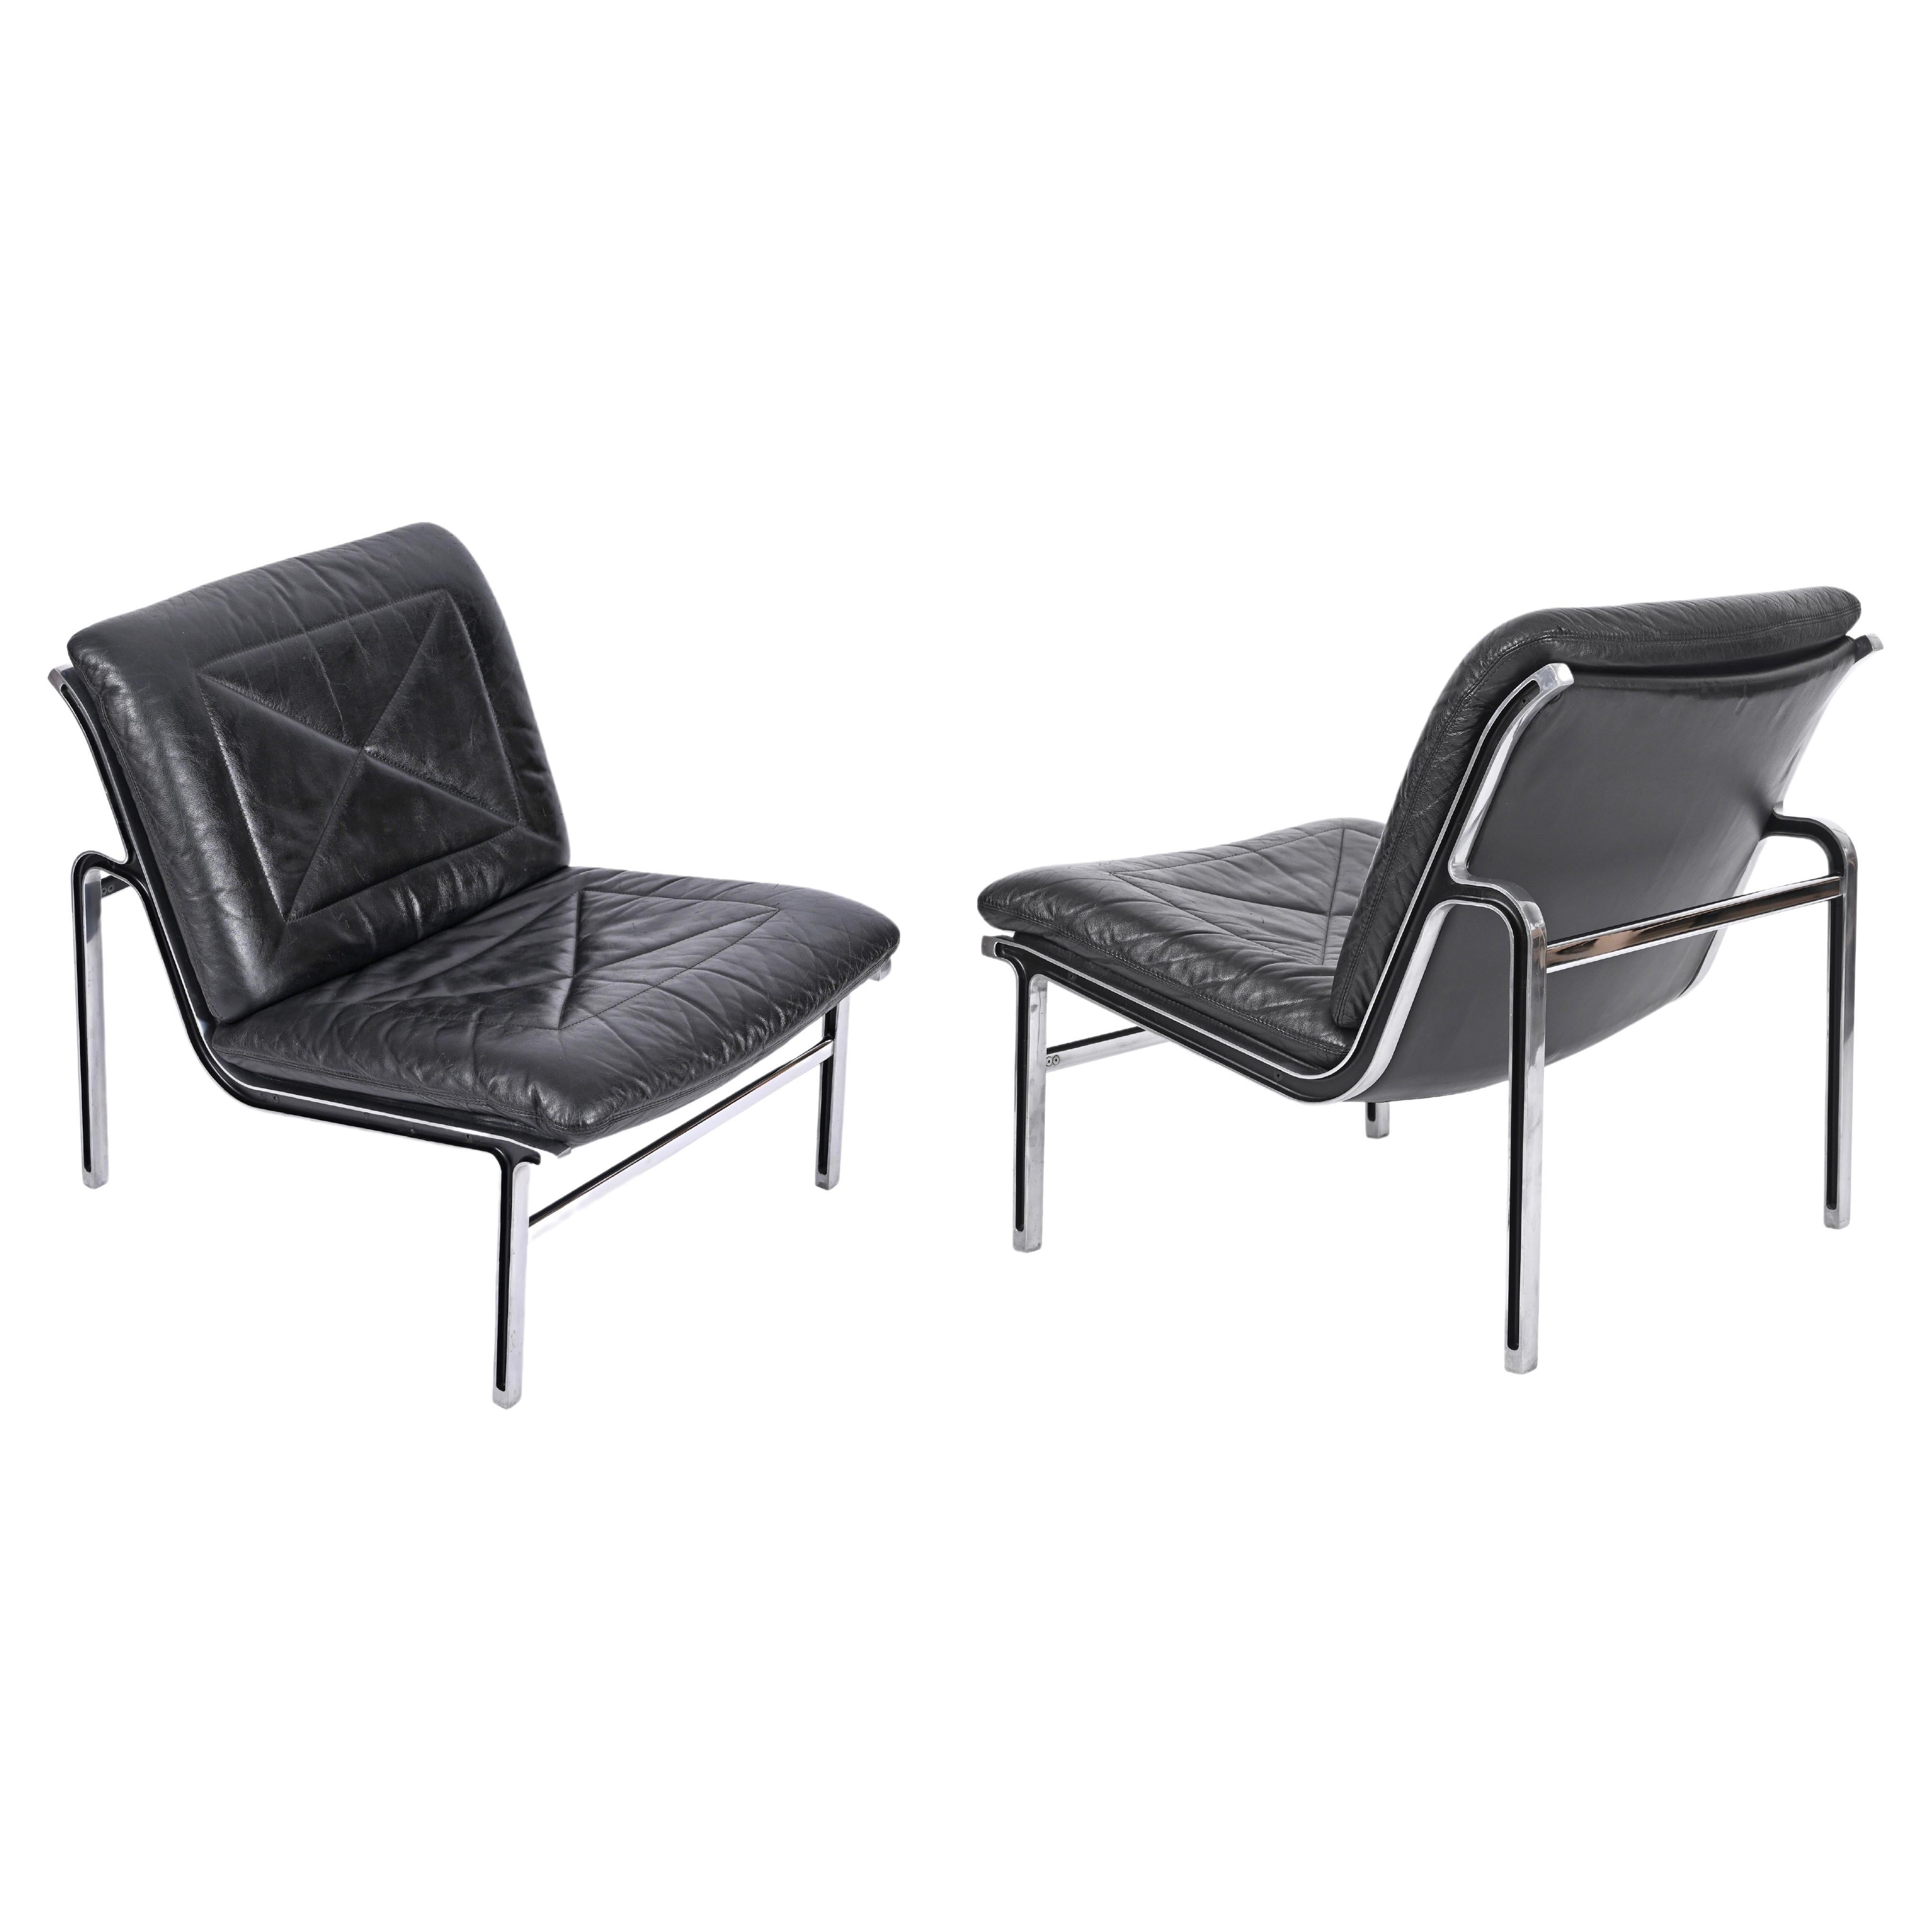 Andre Vandenbeuck Pair of 'Aluline' Lounge Chairs in Black Leather, Swiss, 1960s For Sale